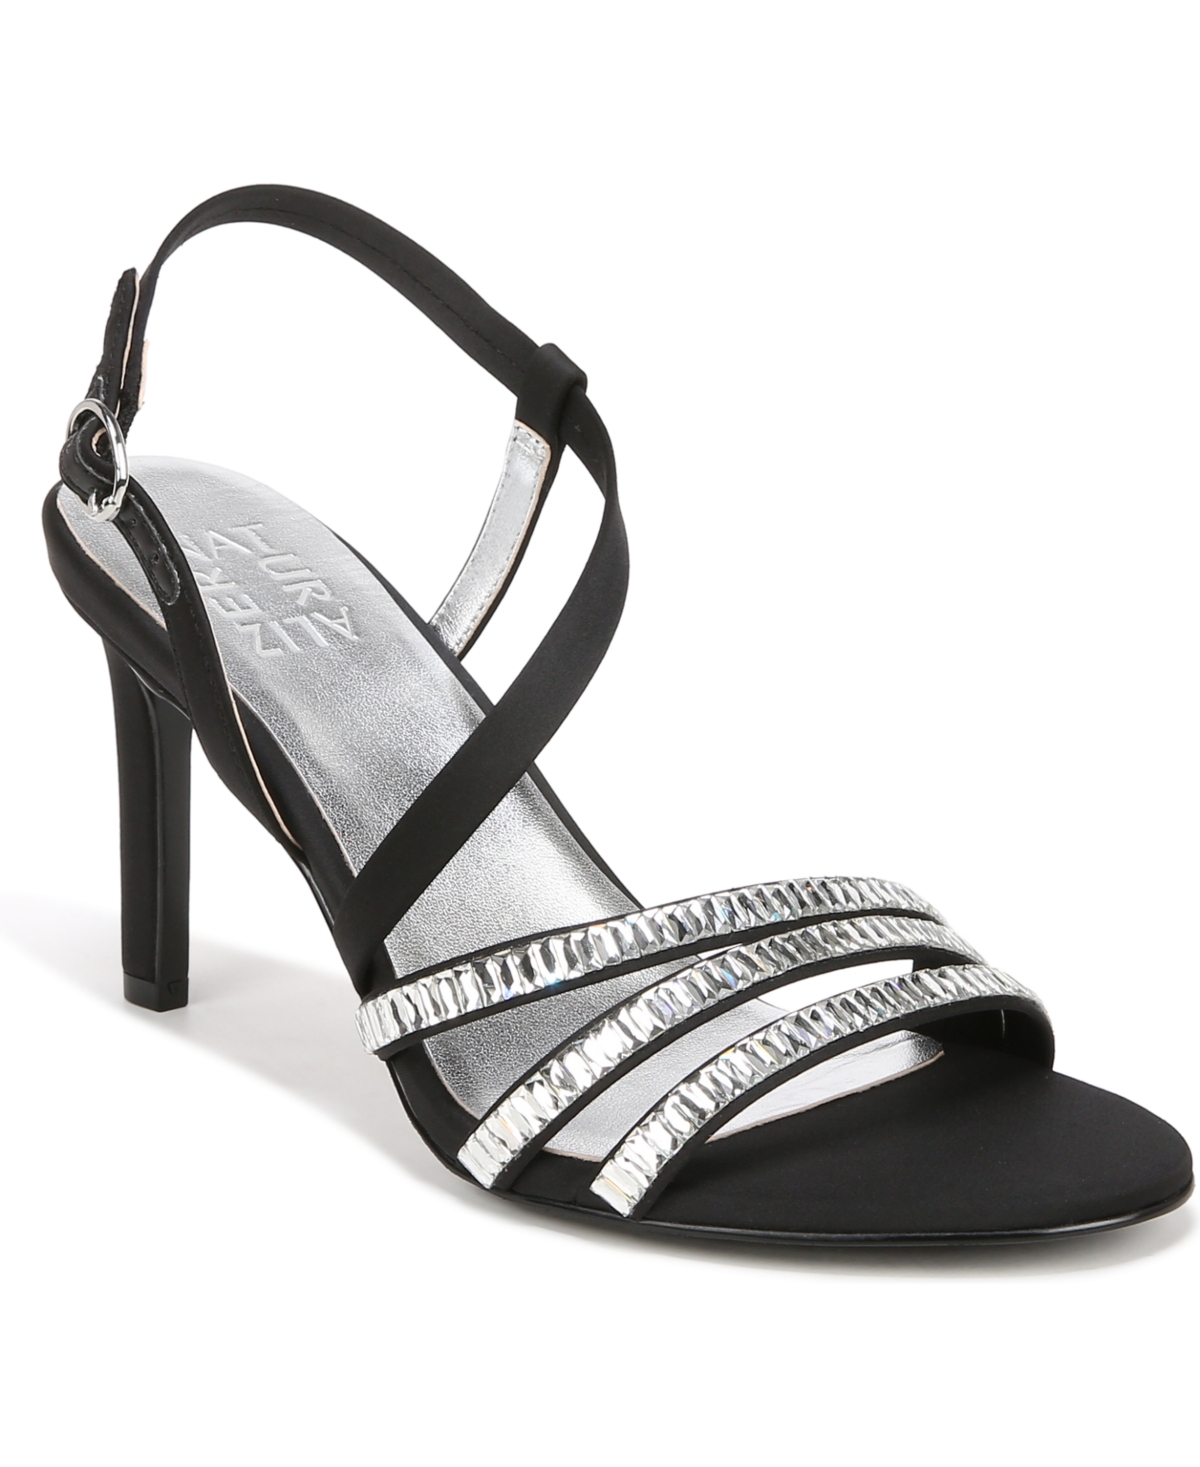 Kimberly 2 Strappy Dress Sandals - Silver Satin/Stones